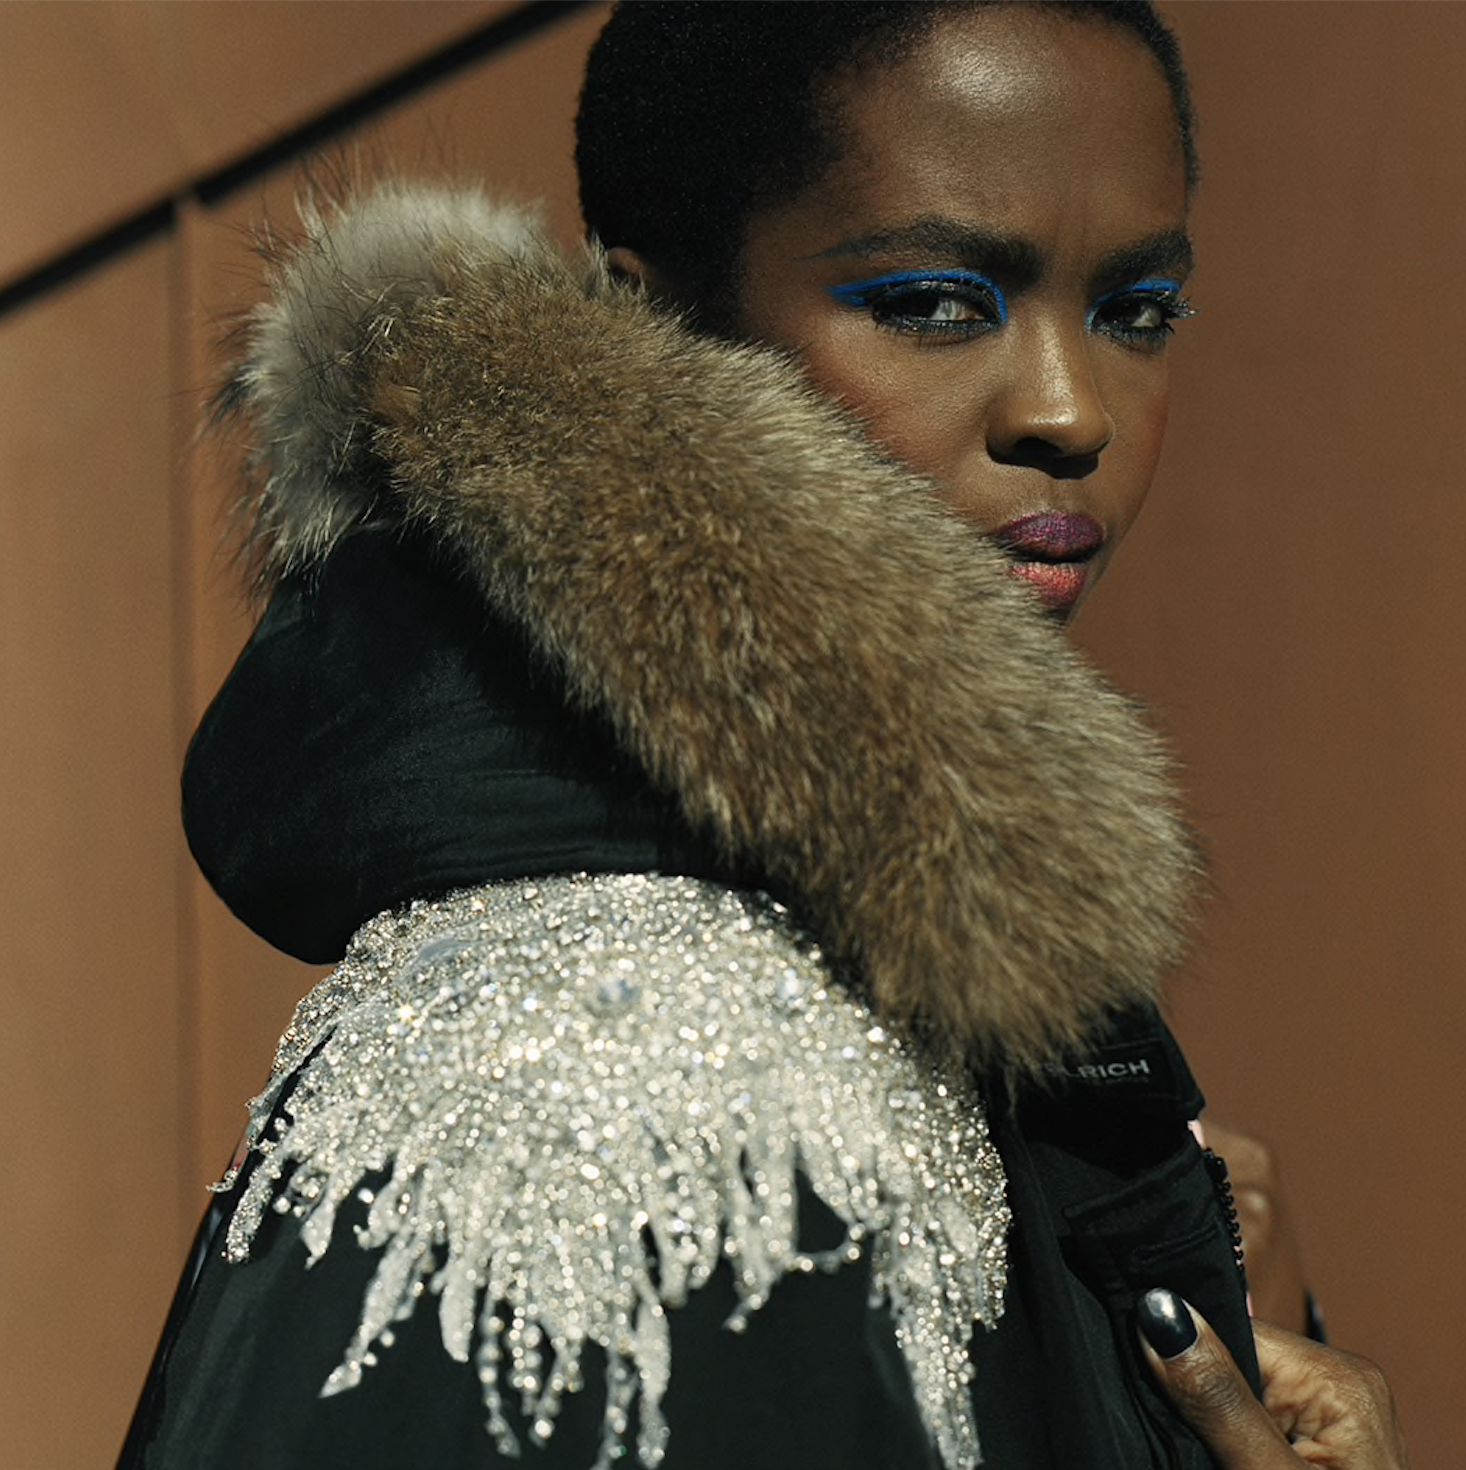 Lauryn Hill ‘Doo-Wops’ Her Thing For Debut New York Fashion Week Collection